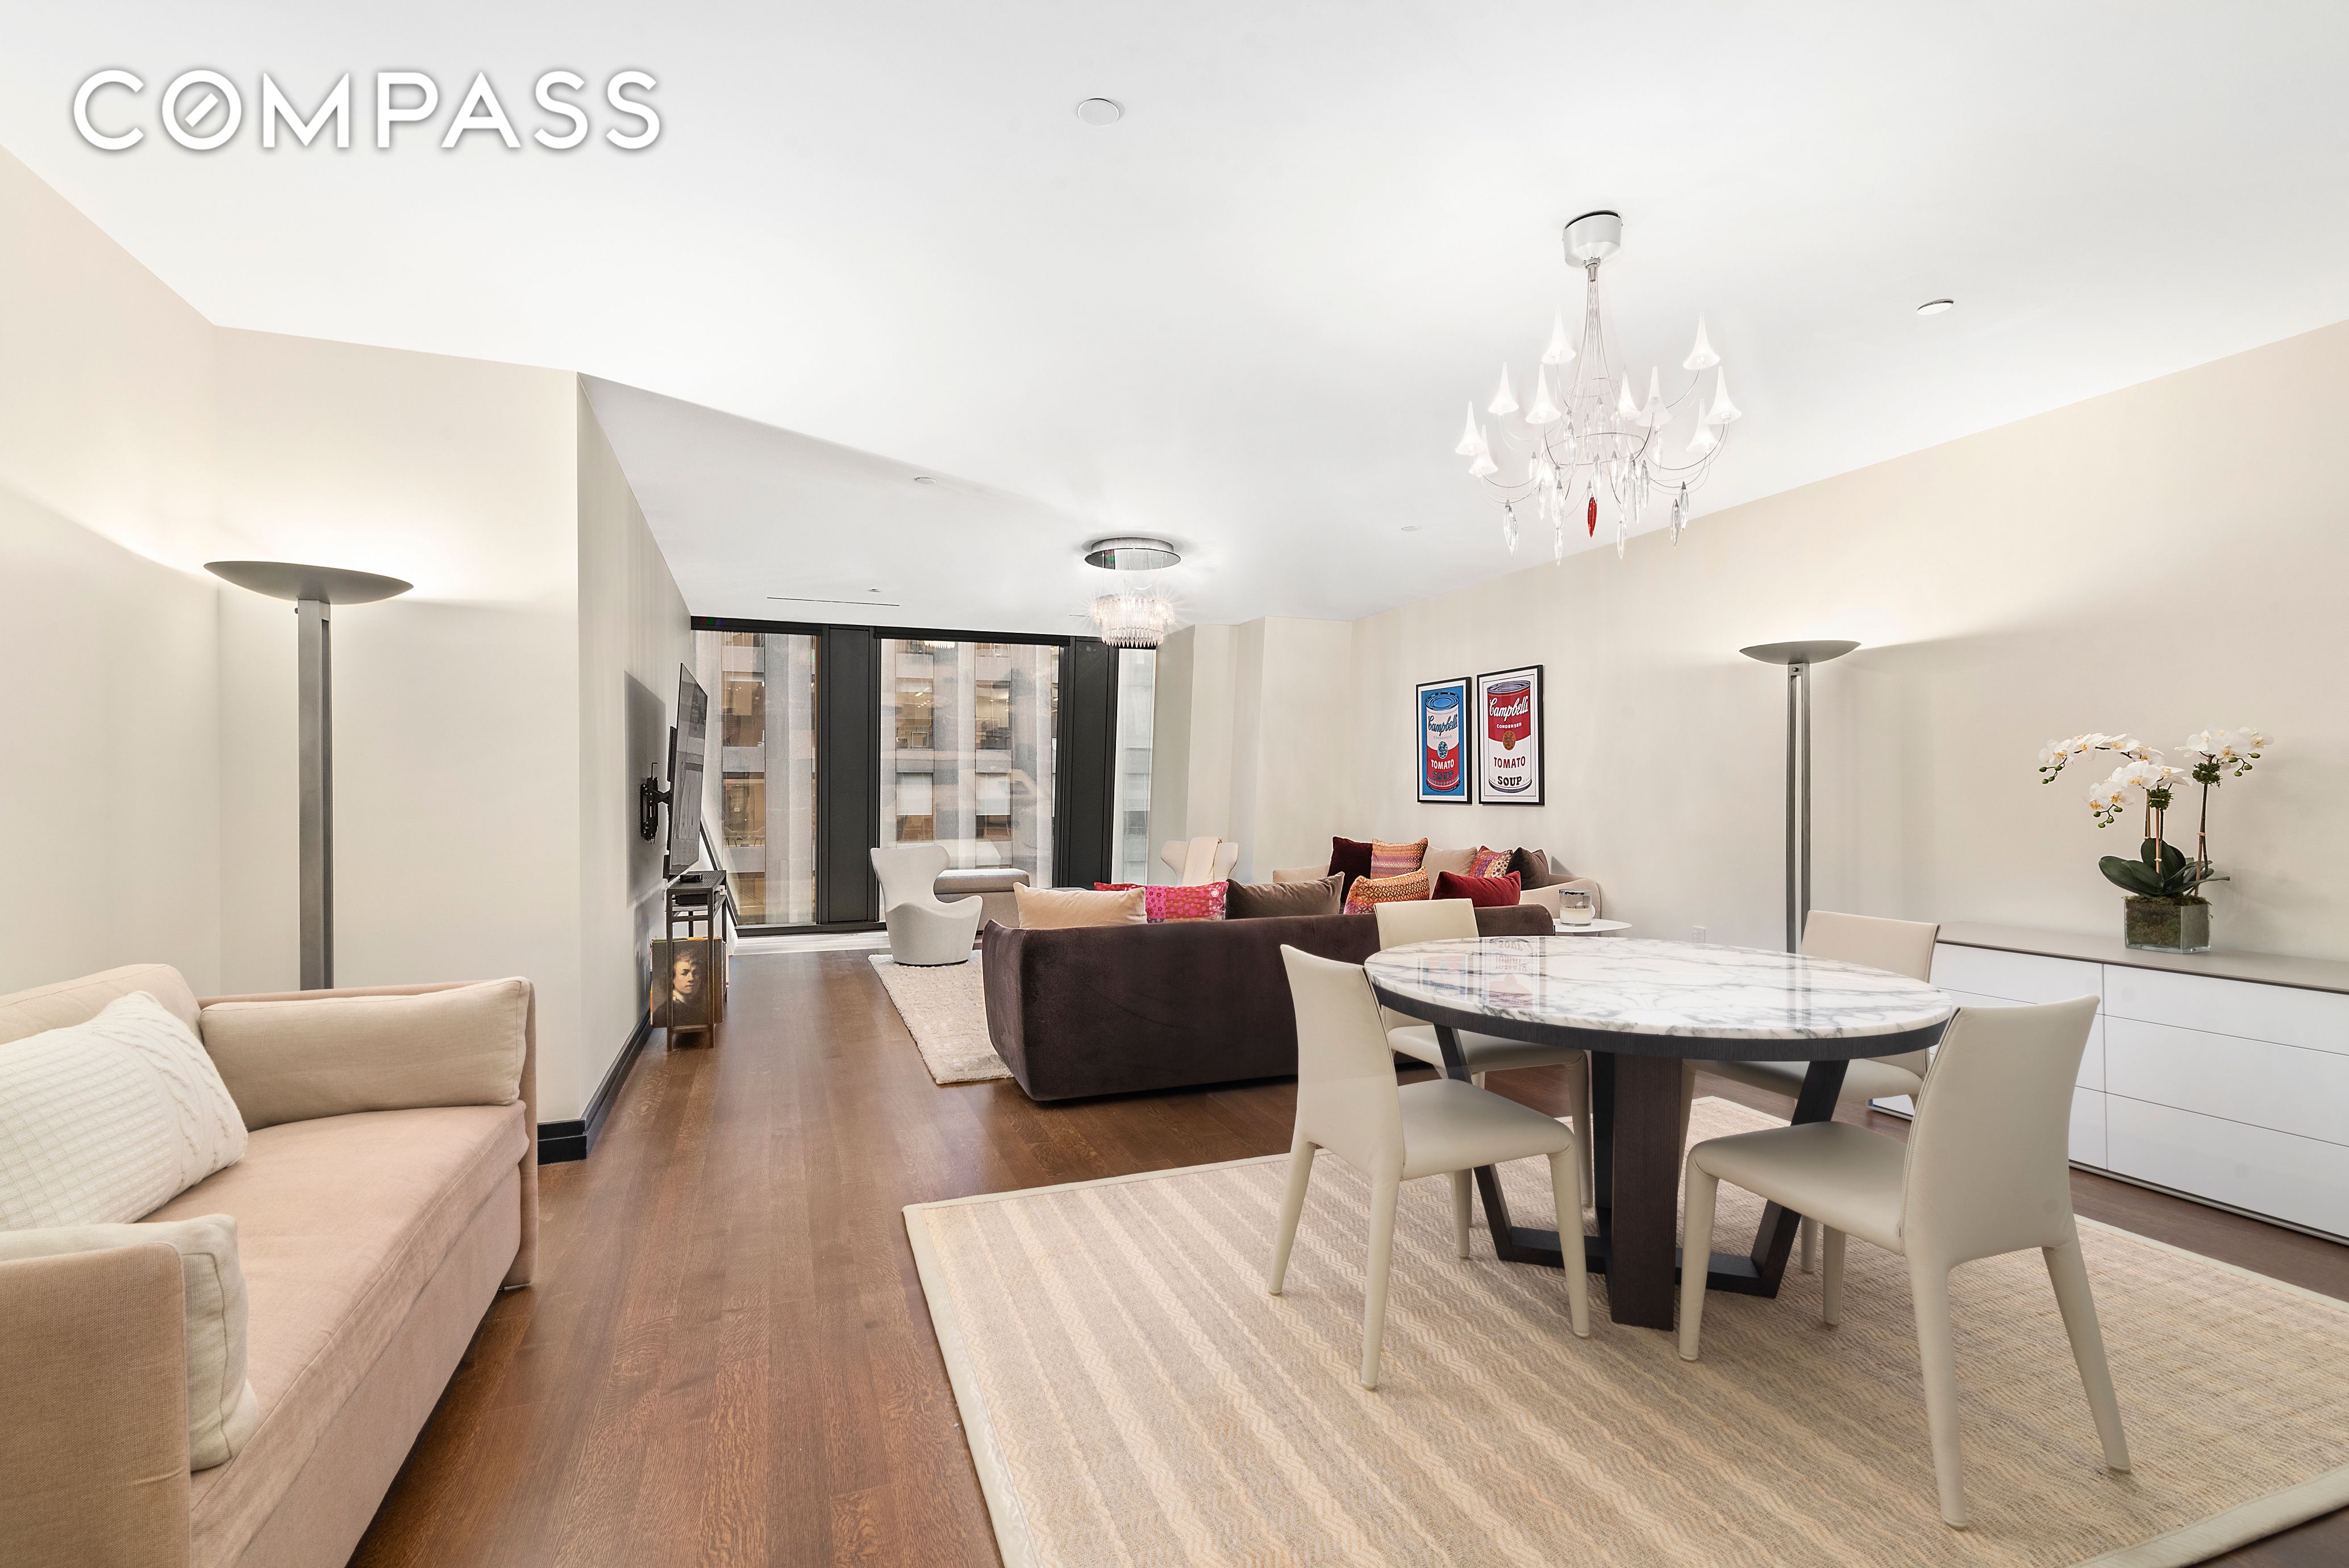 53 West 53rd Street 15I, Midtown Central, Midtown East, NYC - 1 Bedrooms  
1.5 Bathrooms  
2 Rooms - 